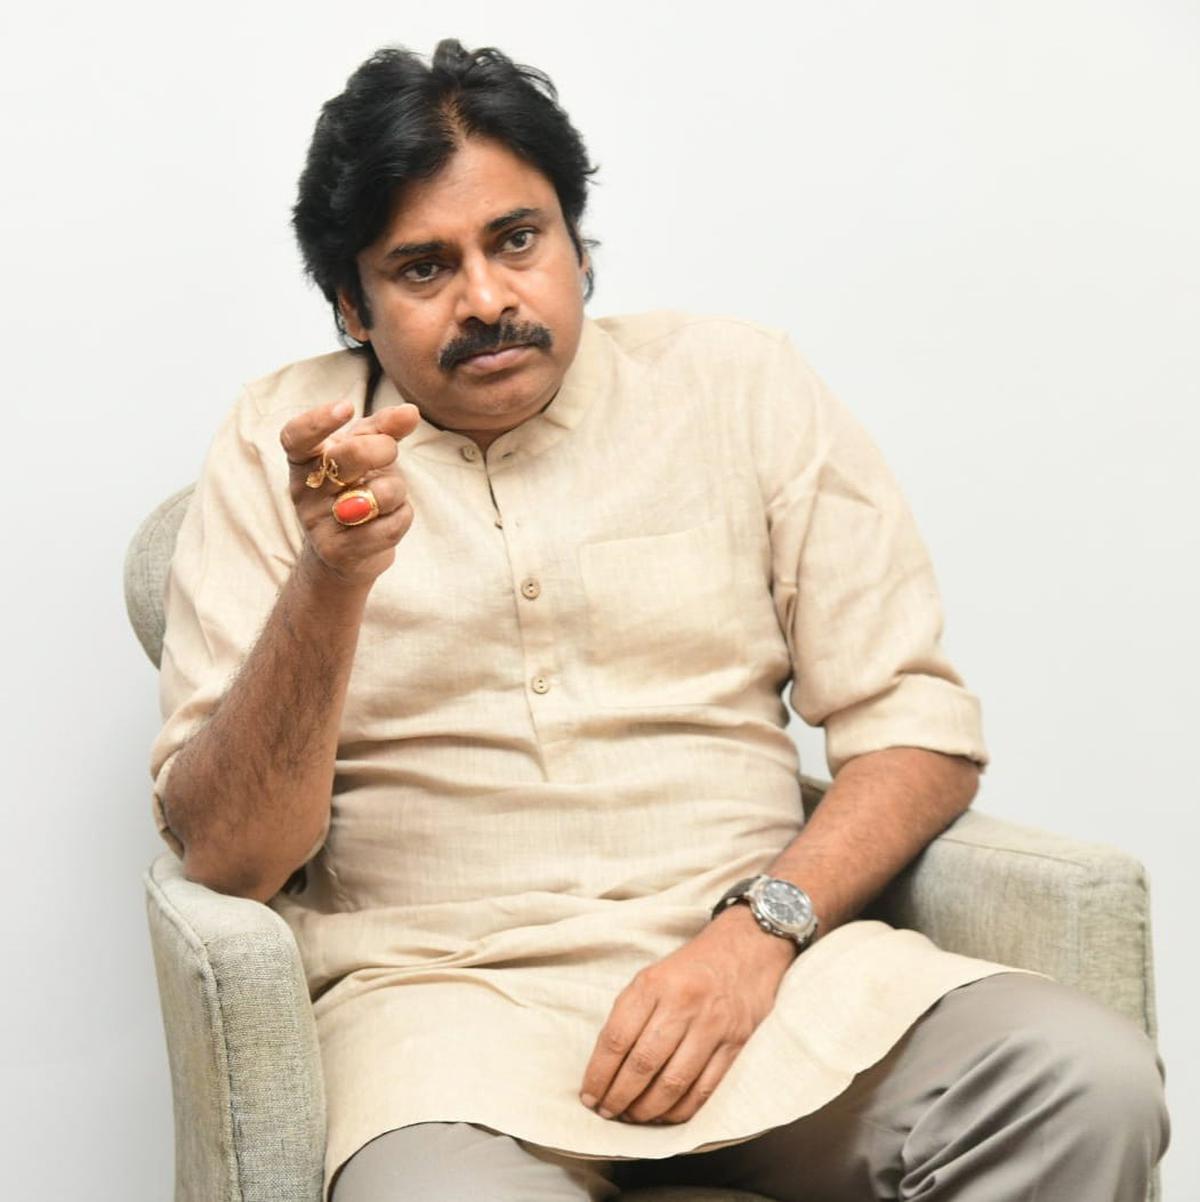 Pawan Kalyan vows to stand by castes that are being denied growth opportunities in Andhra Pradesh - The Hindu